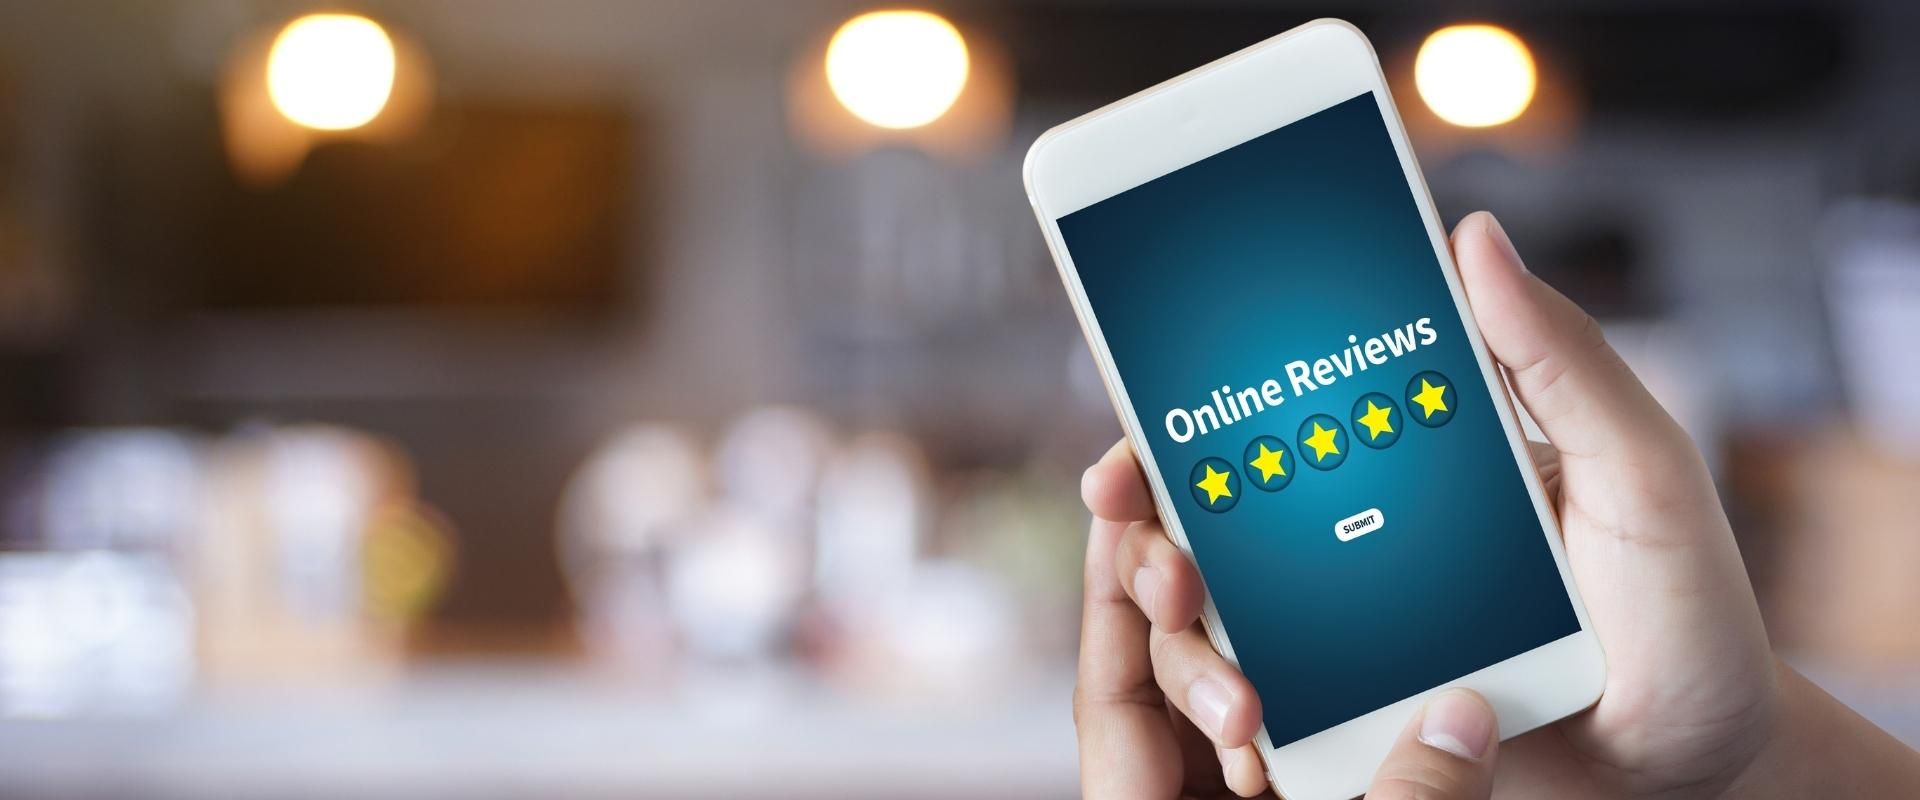 Mobile phone with 5 stars and 'Online Reviews' on screen